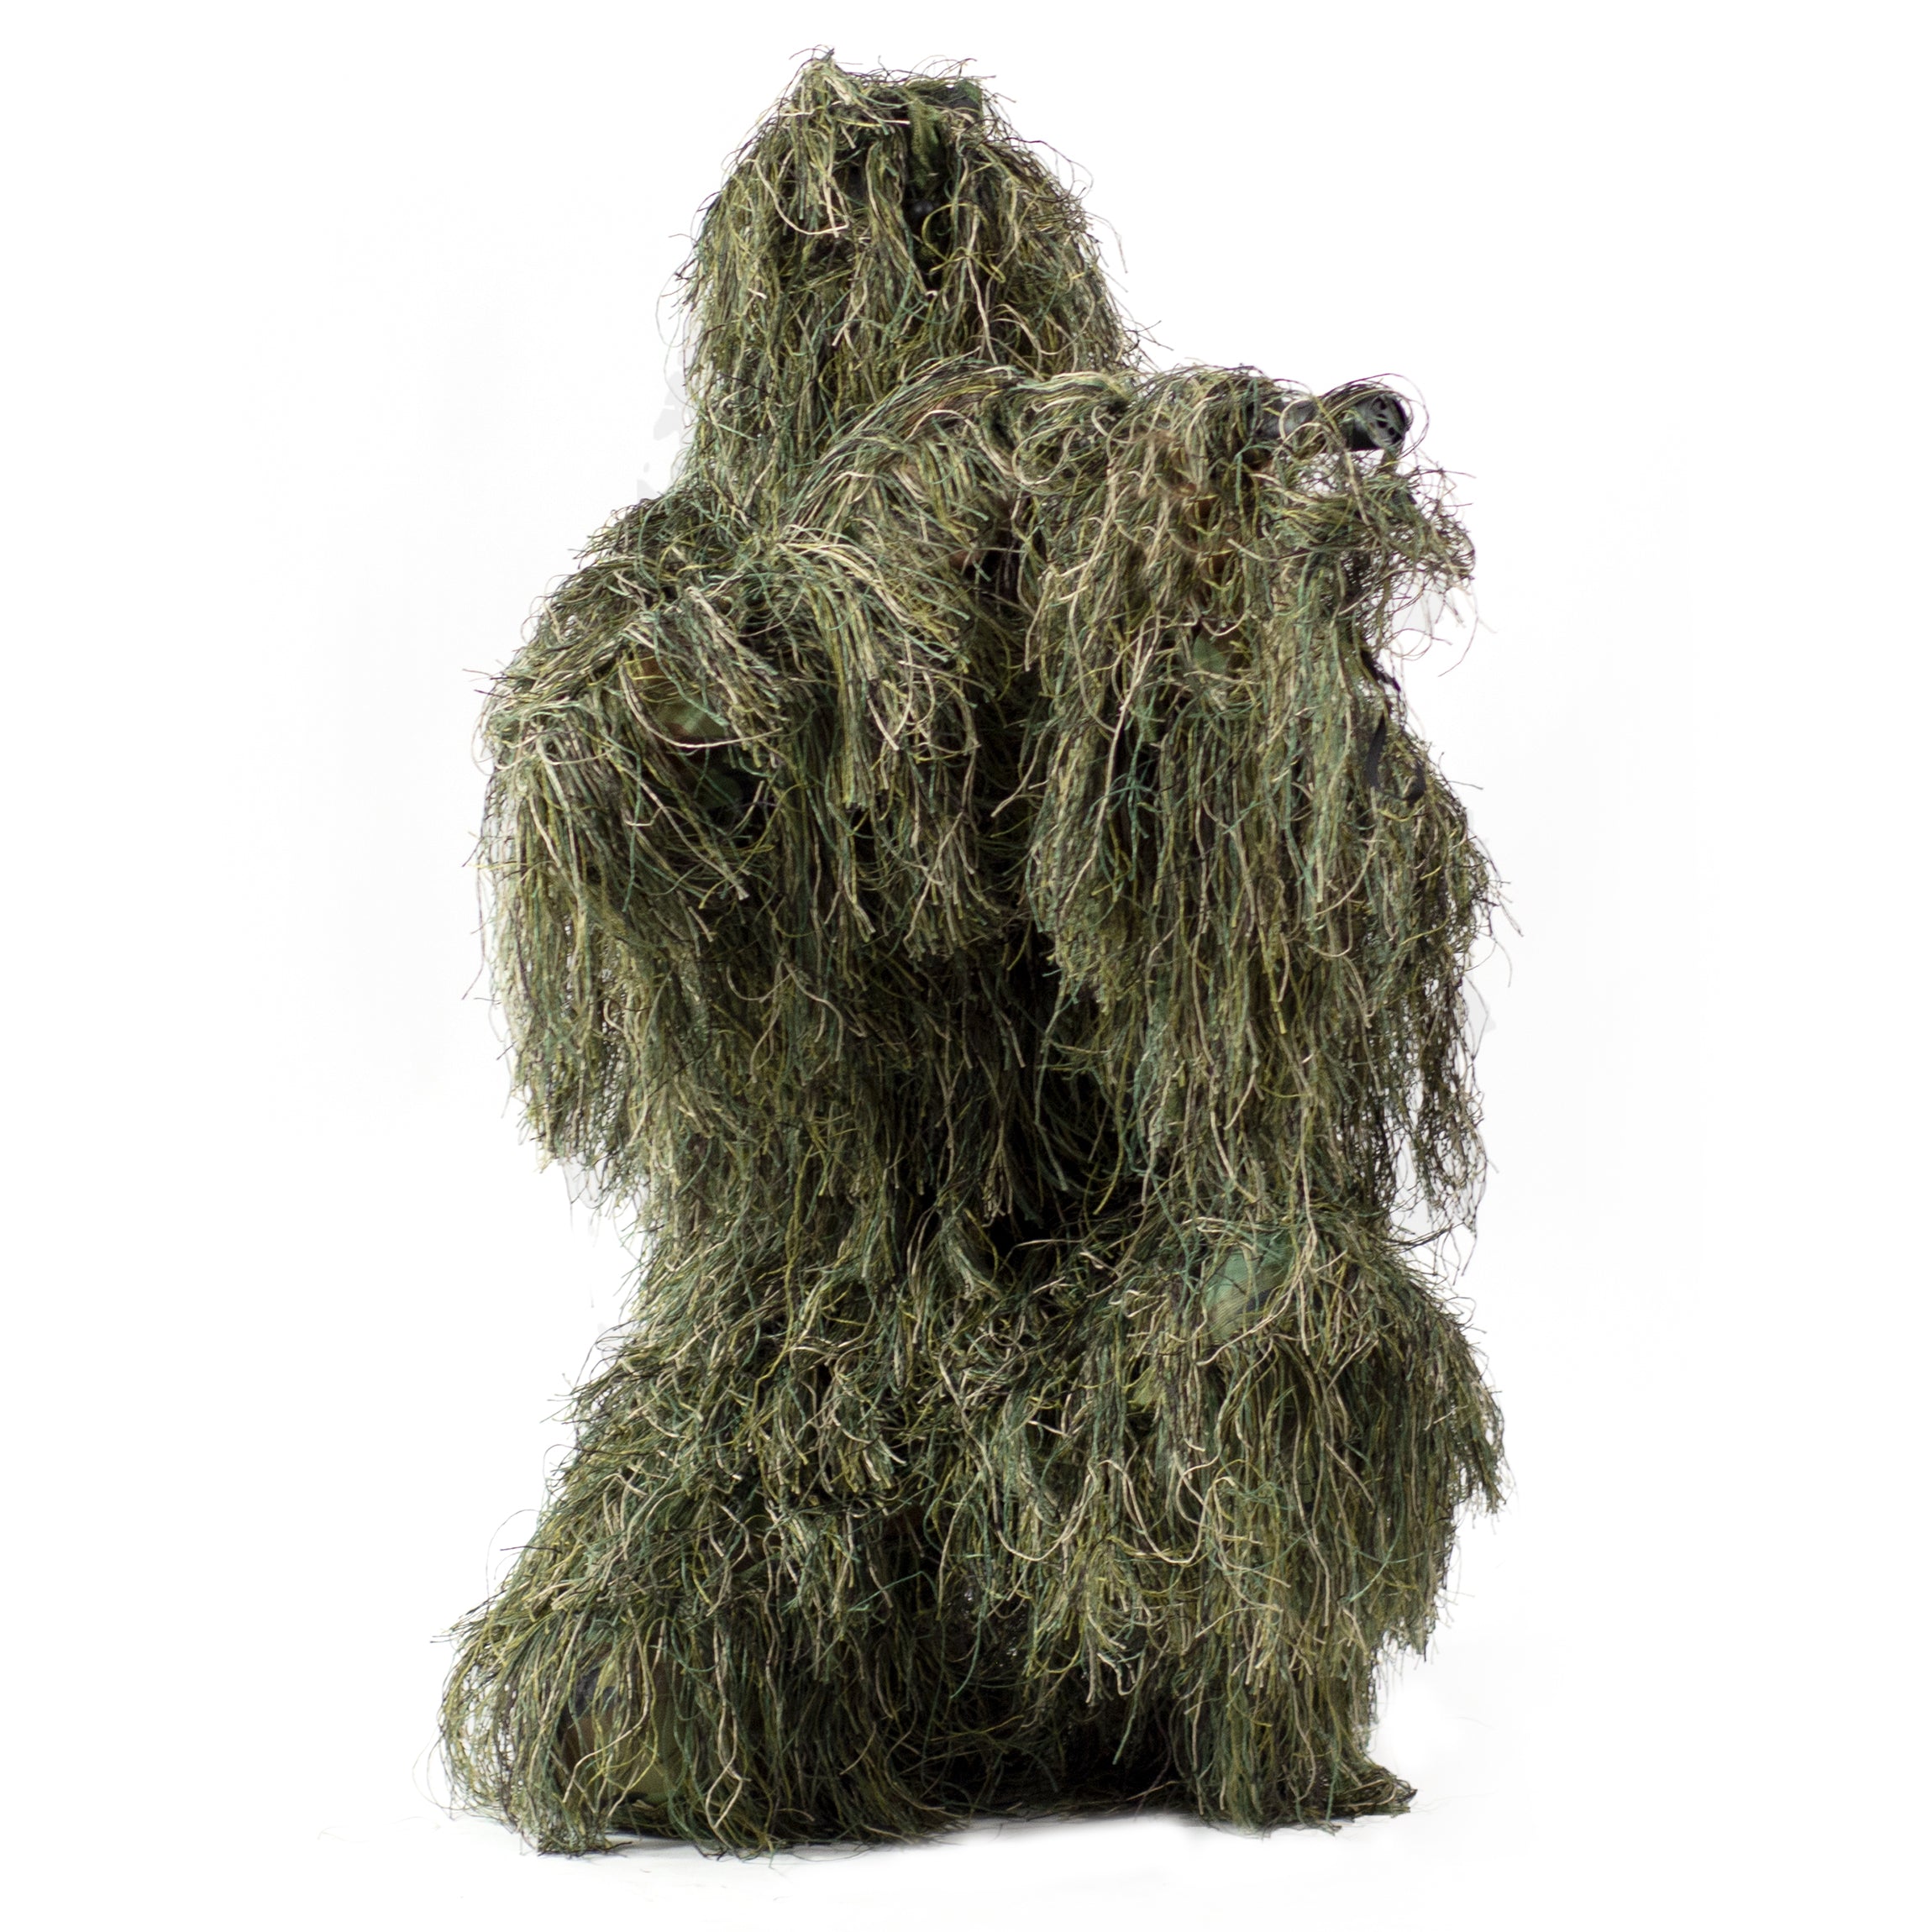 5 In 1 Ghillie Suit 3D Leaf Camo Clothing Suits Camouflage Apparel  Including Jacket Pants Hood Carry Bag For Kids Jungle Photography Halloween  